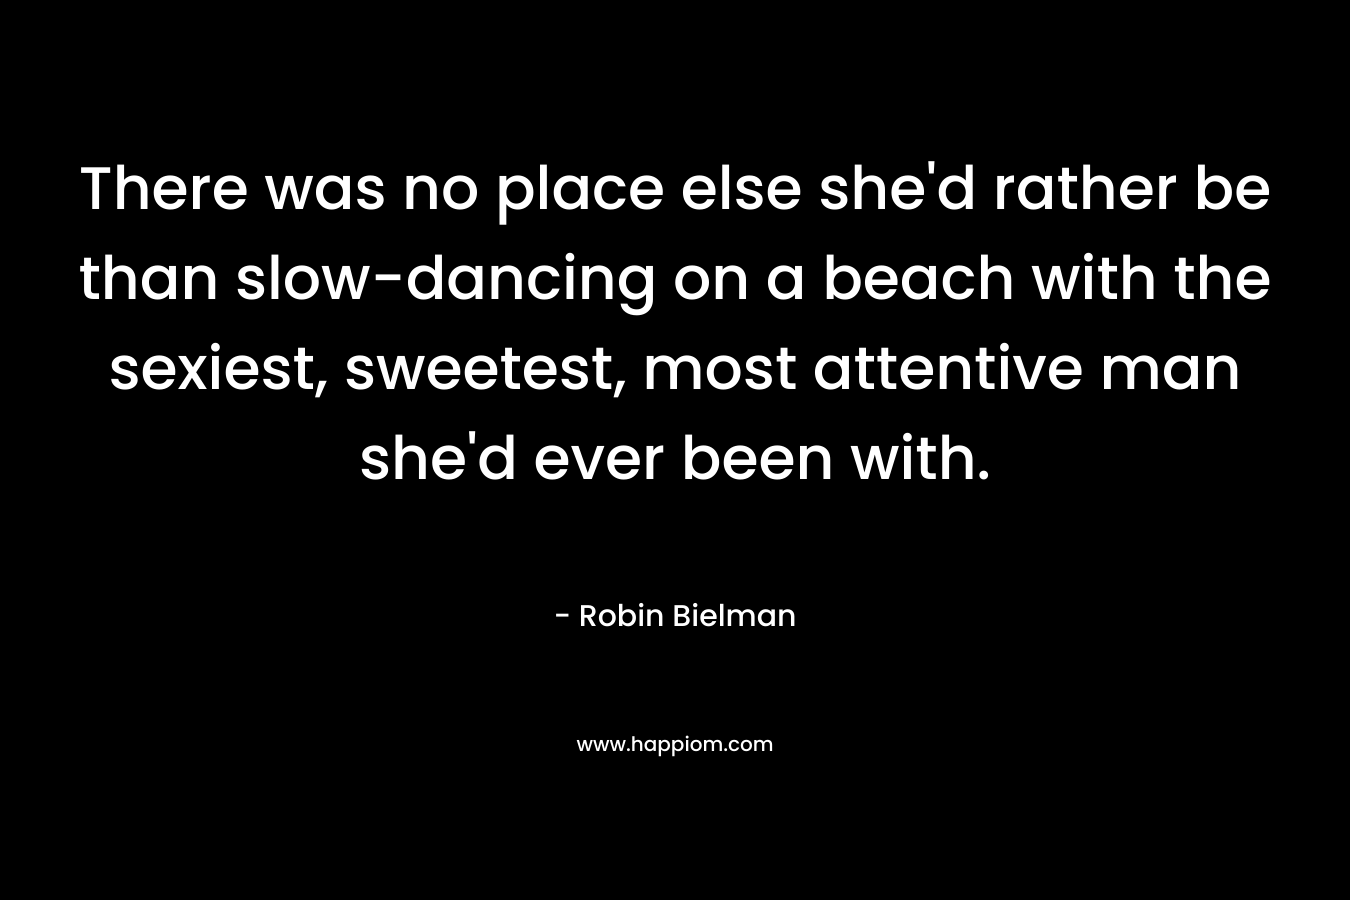 There was no place else she'd rather be than slow-dancing on a beach with the sexiest, sweetest, most attentive man she'd ever been with.